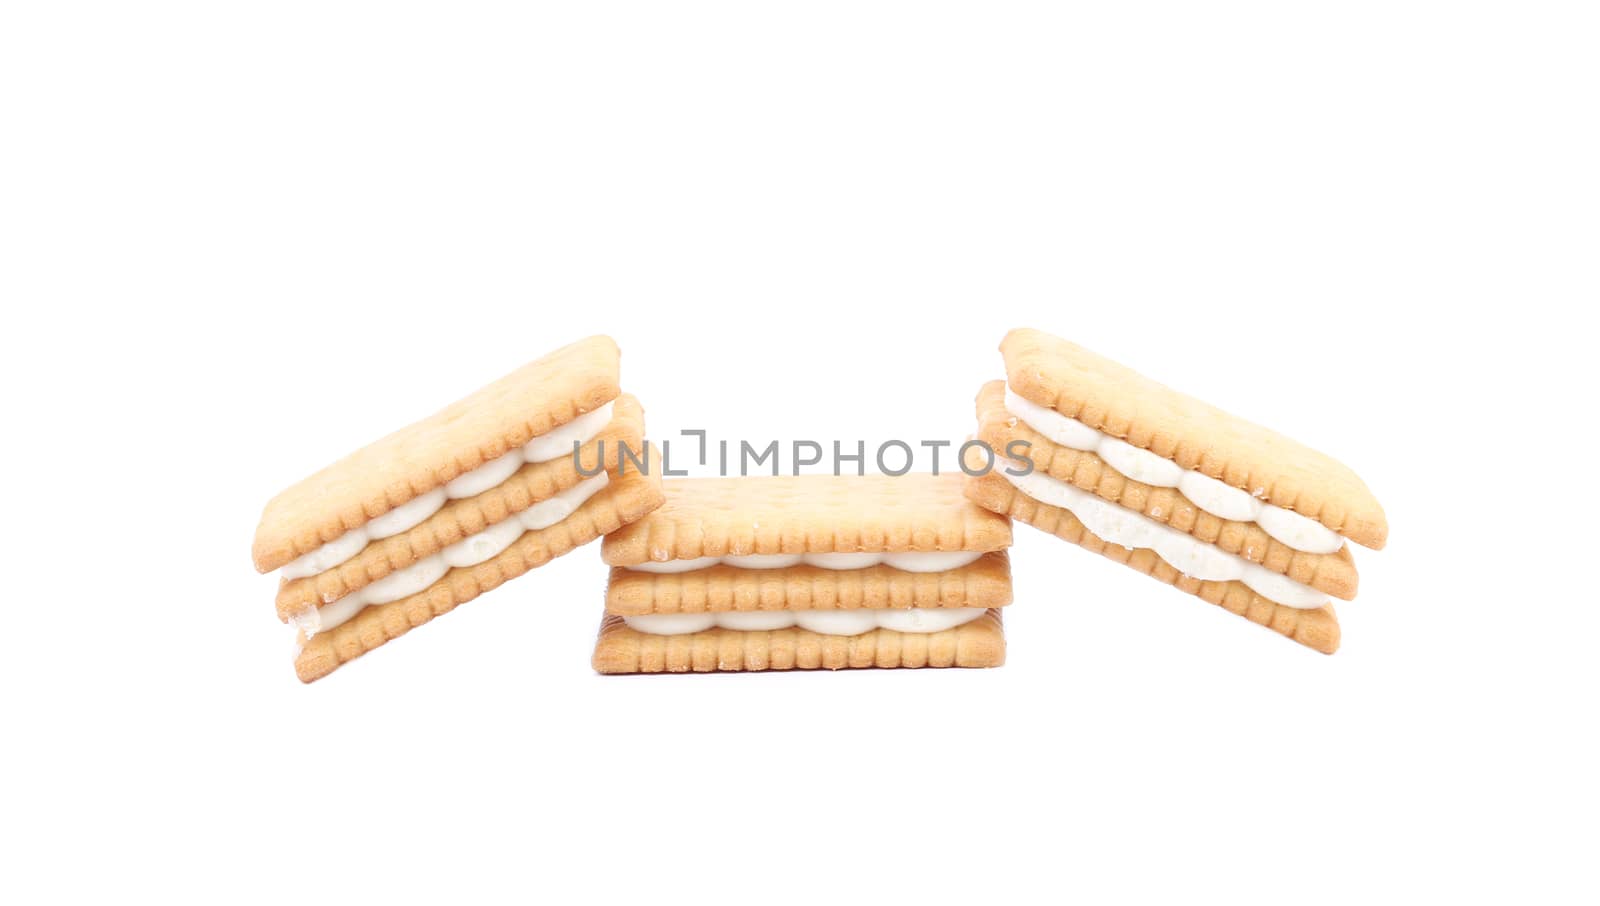 Tasty cream filled cookies. Isolated on a white background.